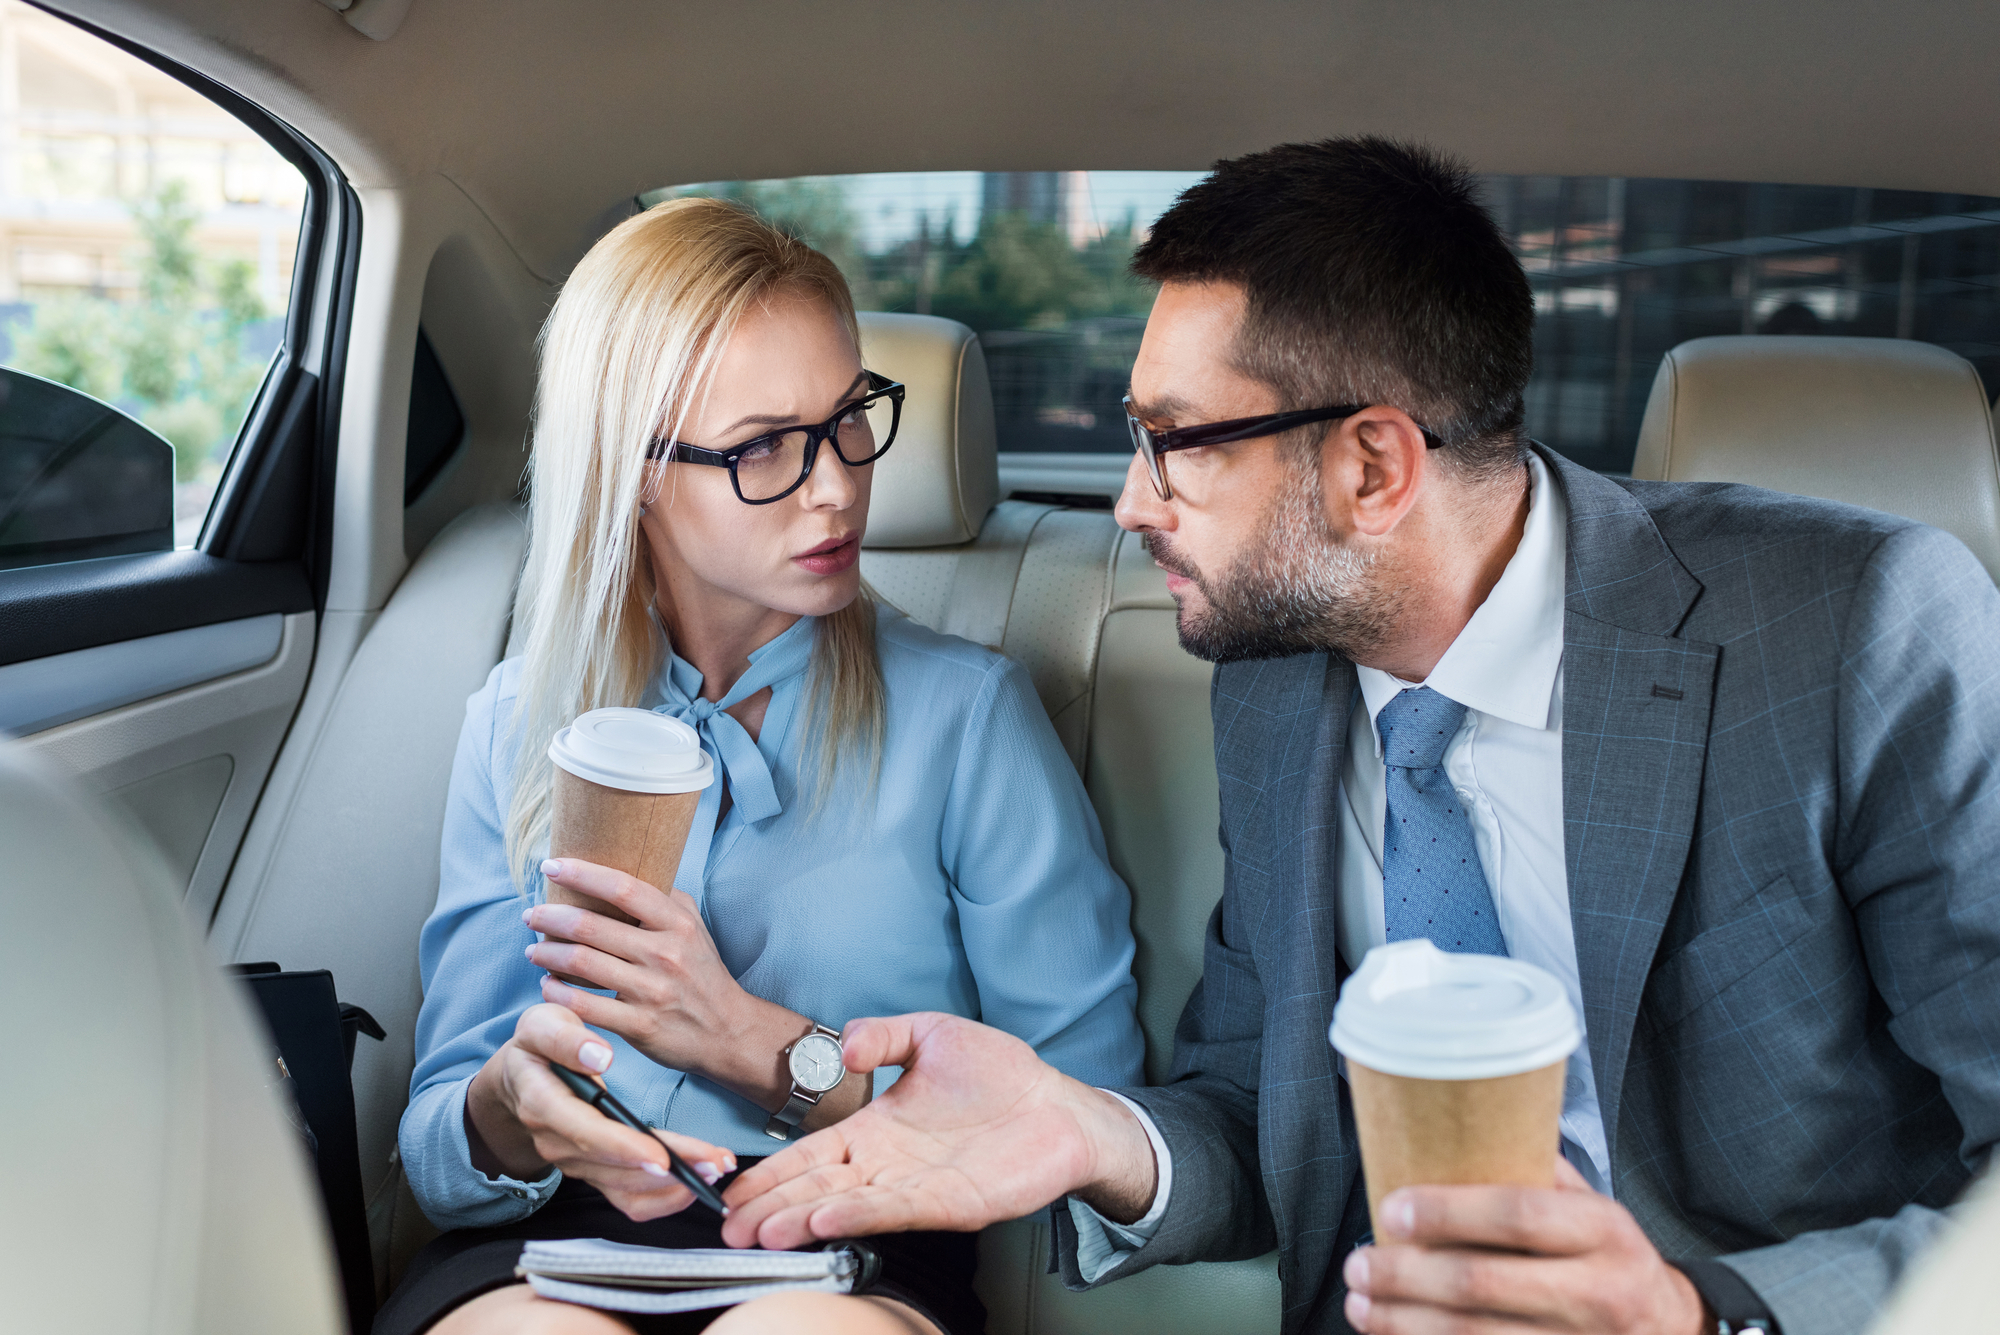 Two business professionals sit in the back seat of a car, both holding coffee cups. They are engaged in a serious conversation. The woman is writing in a notebook and the man is gesturing with his hand. They are both dressed in business attire and wearing glasses.